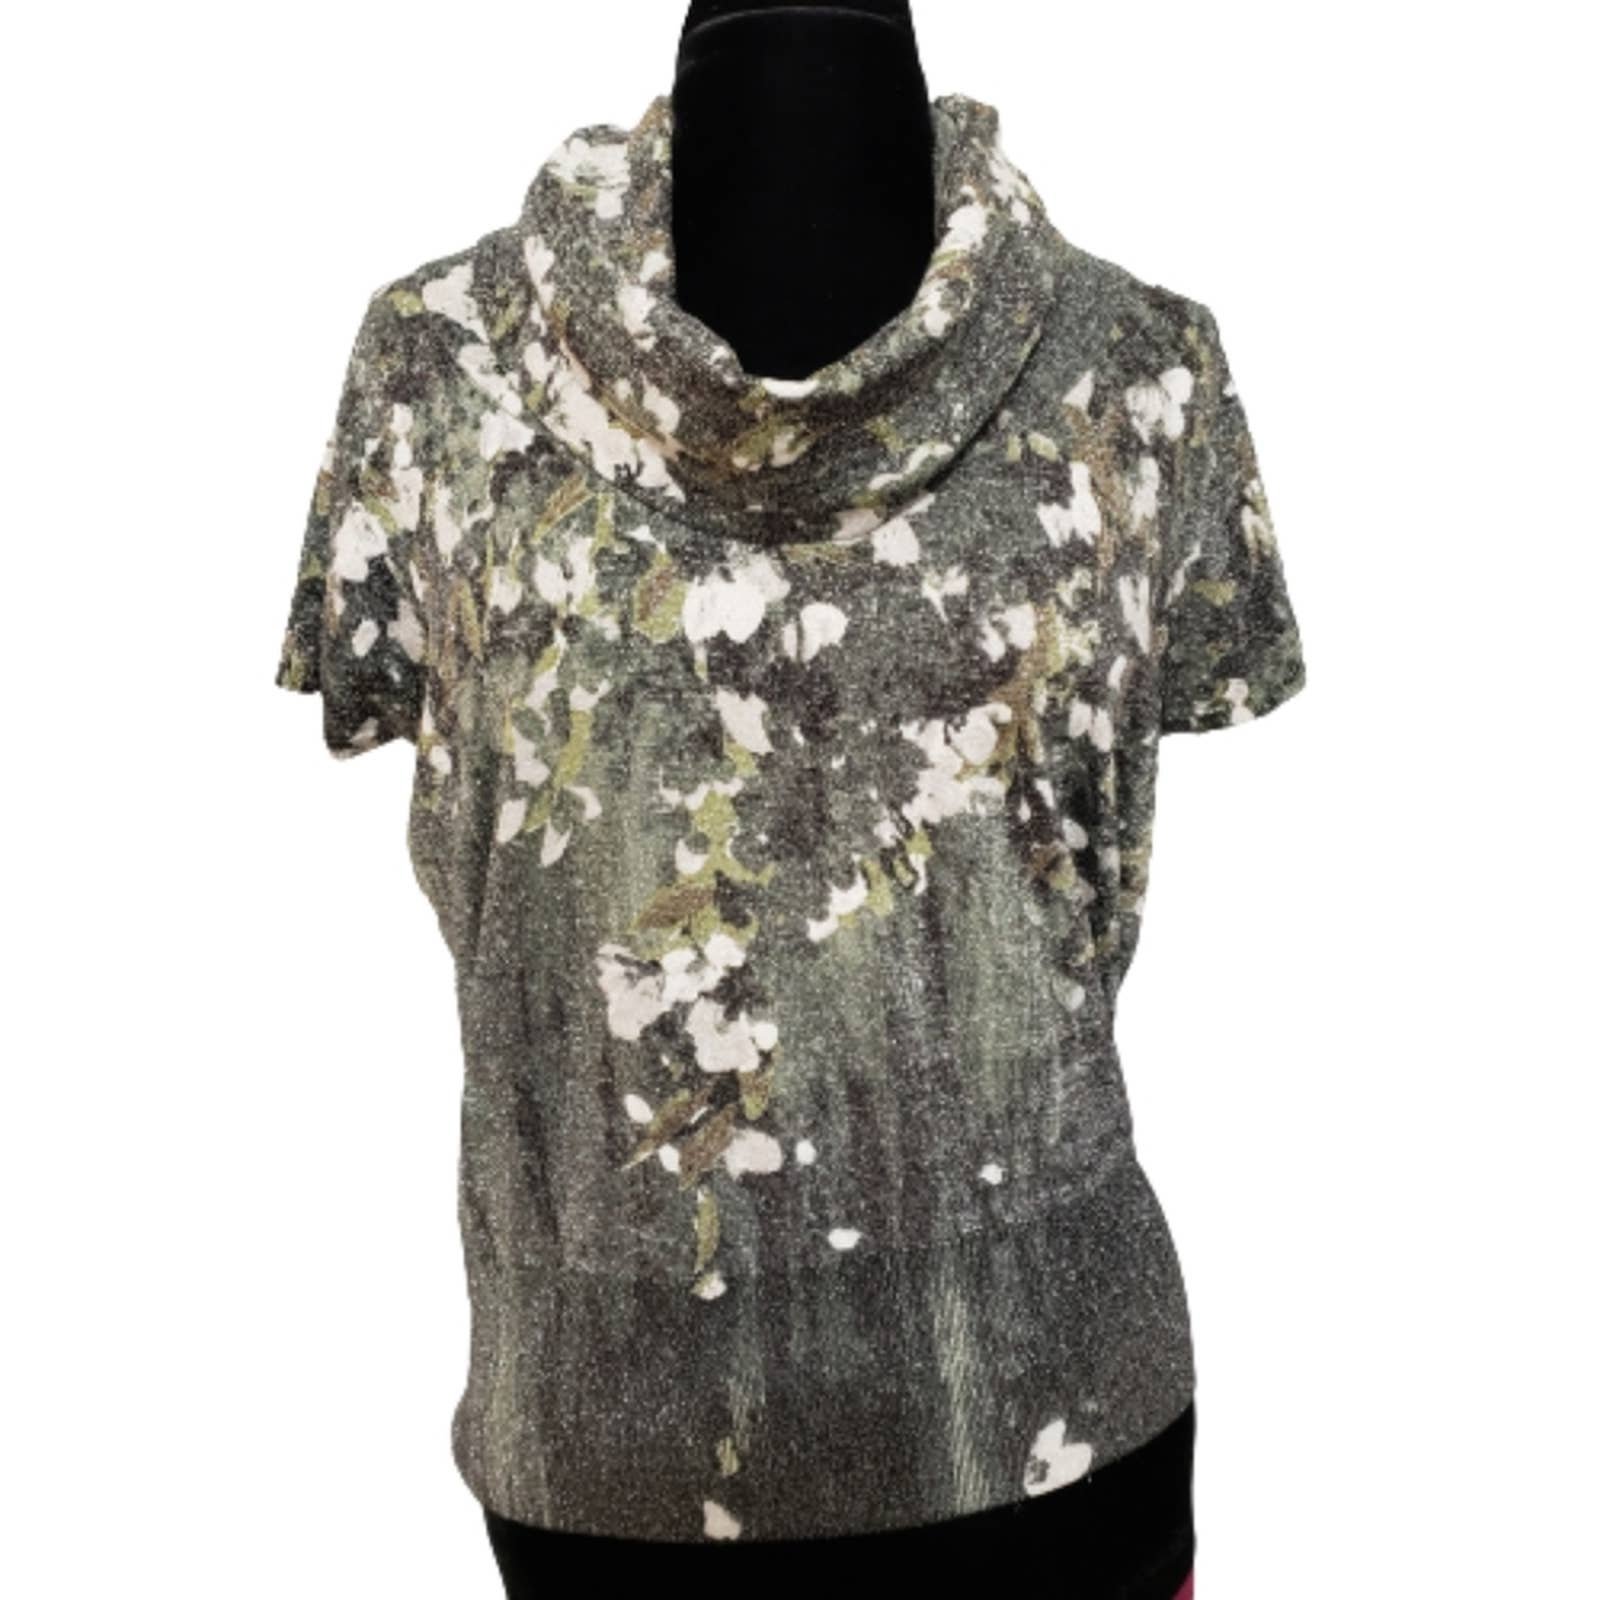 high discount Floral Silver and Green Cowl Neck Metallic Short Sleeve Knit Sweater Large iDroYxvk8 Everyday Low Prices